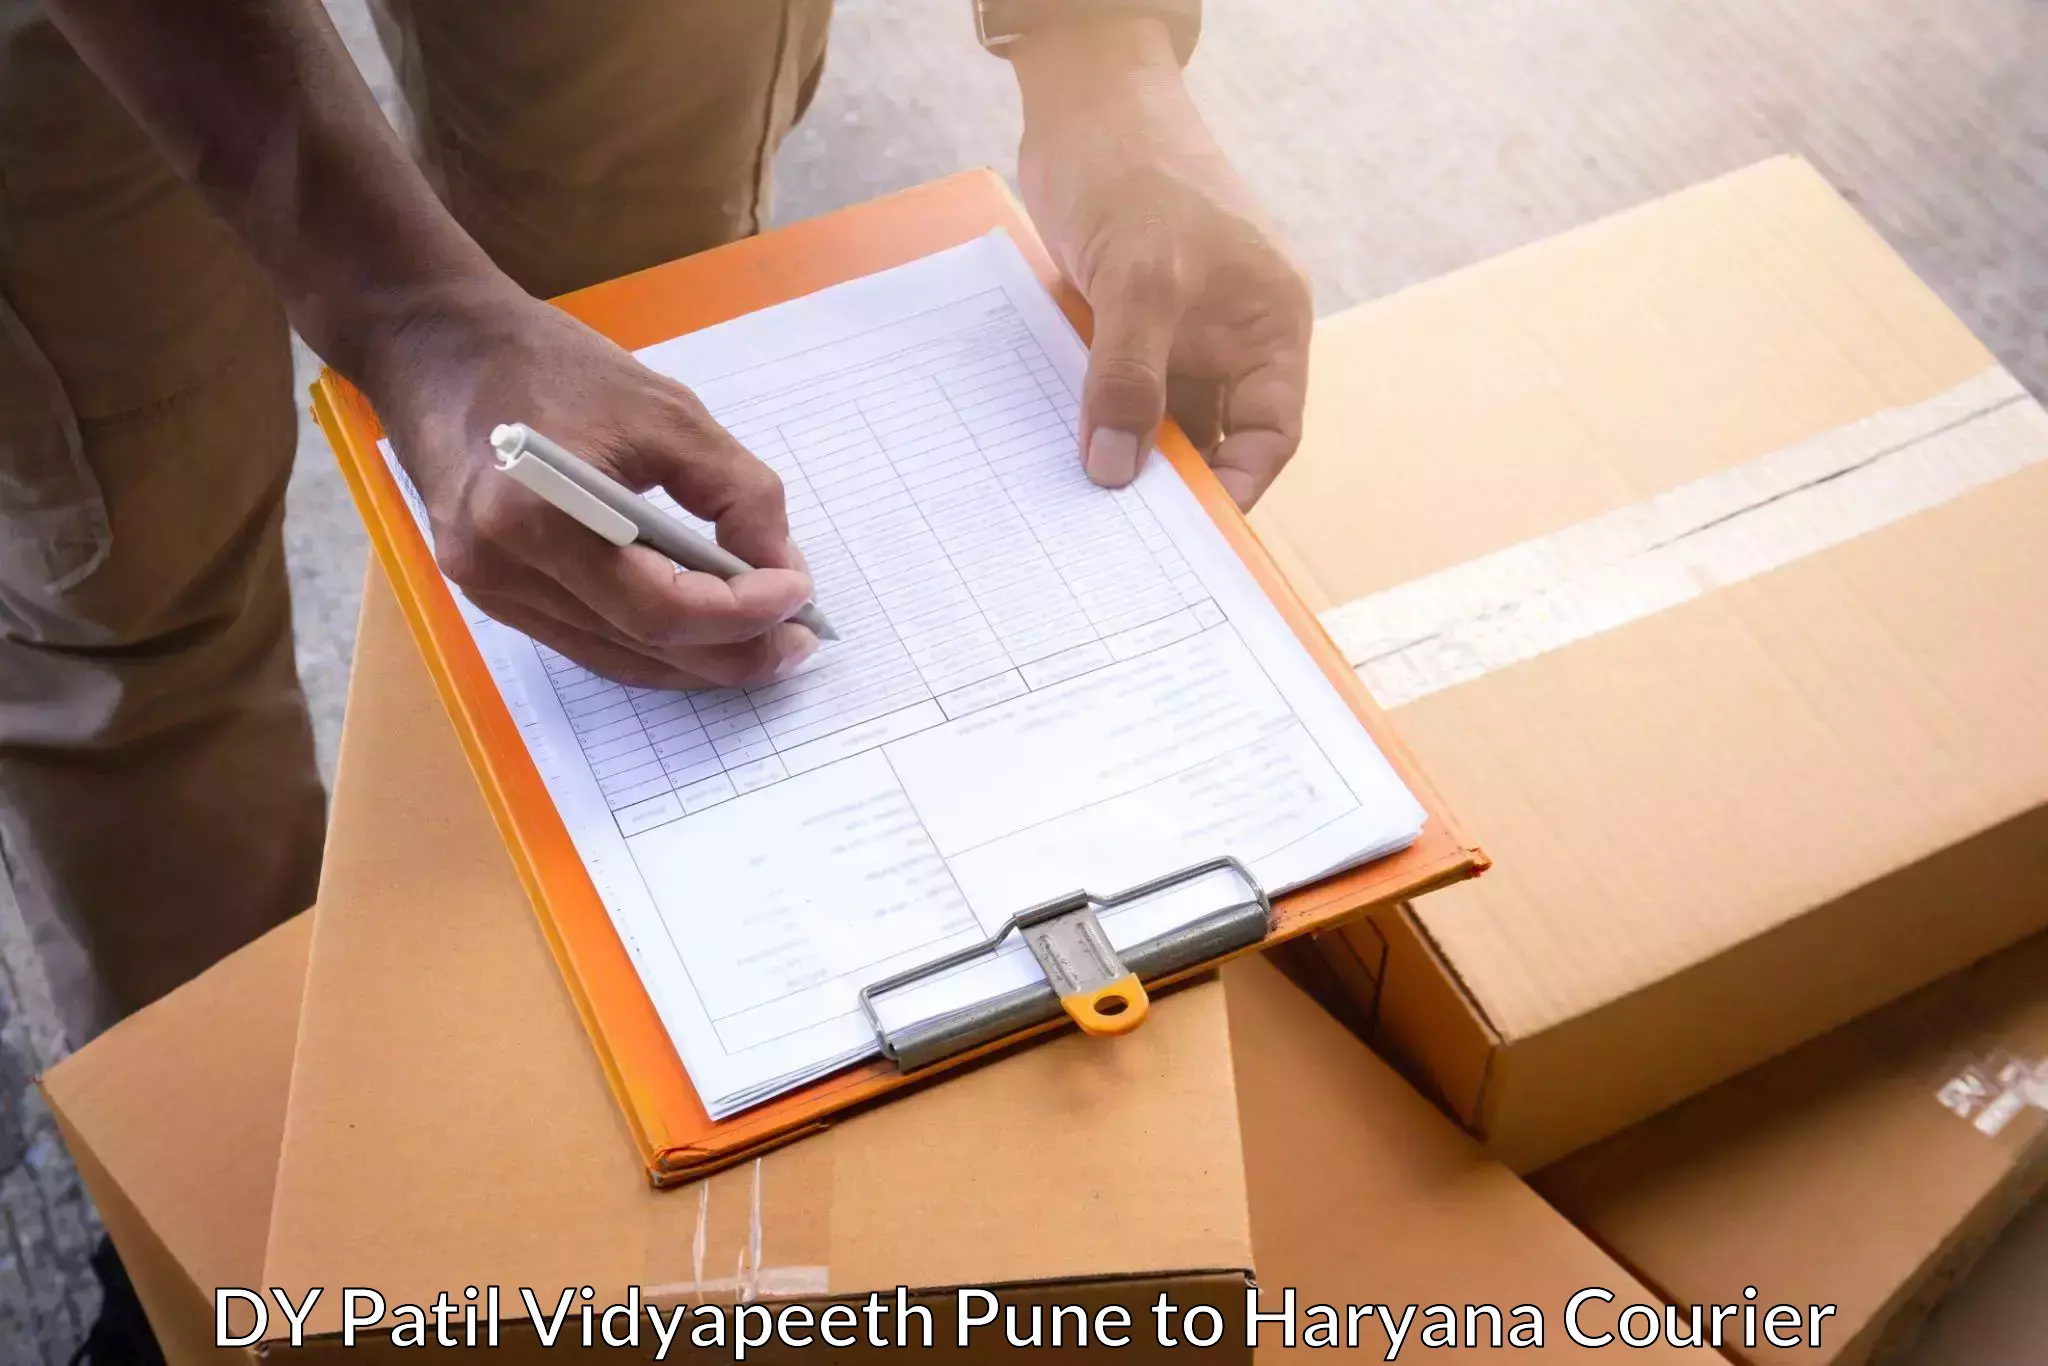 Professional courier handling DY Patil Vidyapeeth Pune to Gurgaon